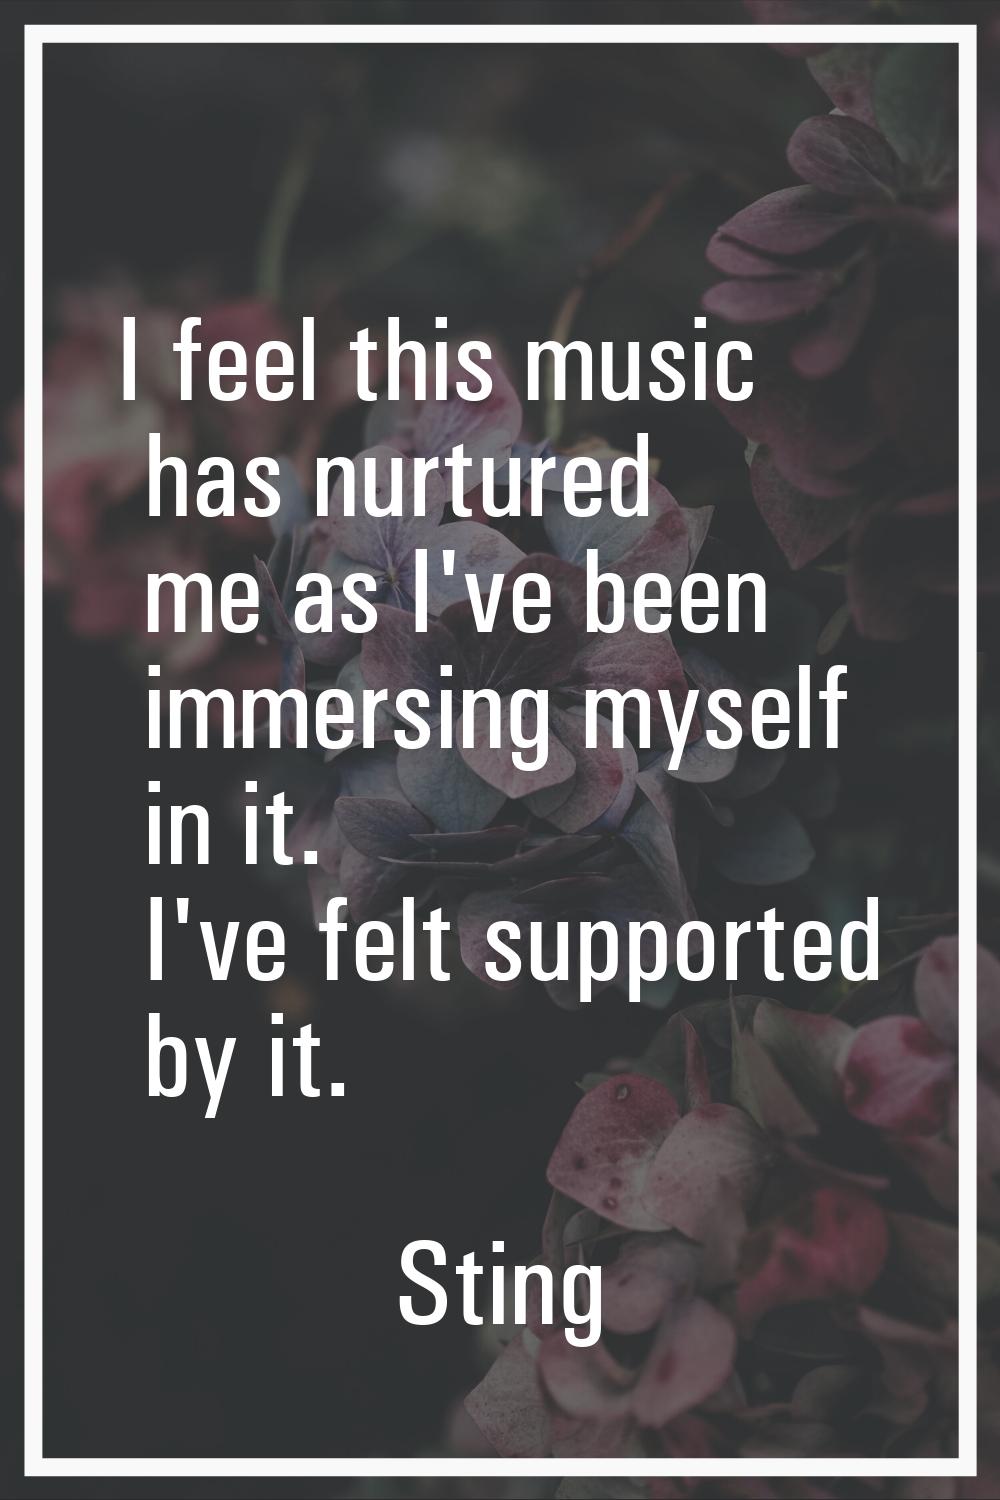 I feel this music has nurtured me as I've been immersing myself in it. I've felt supported by it.